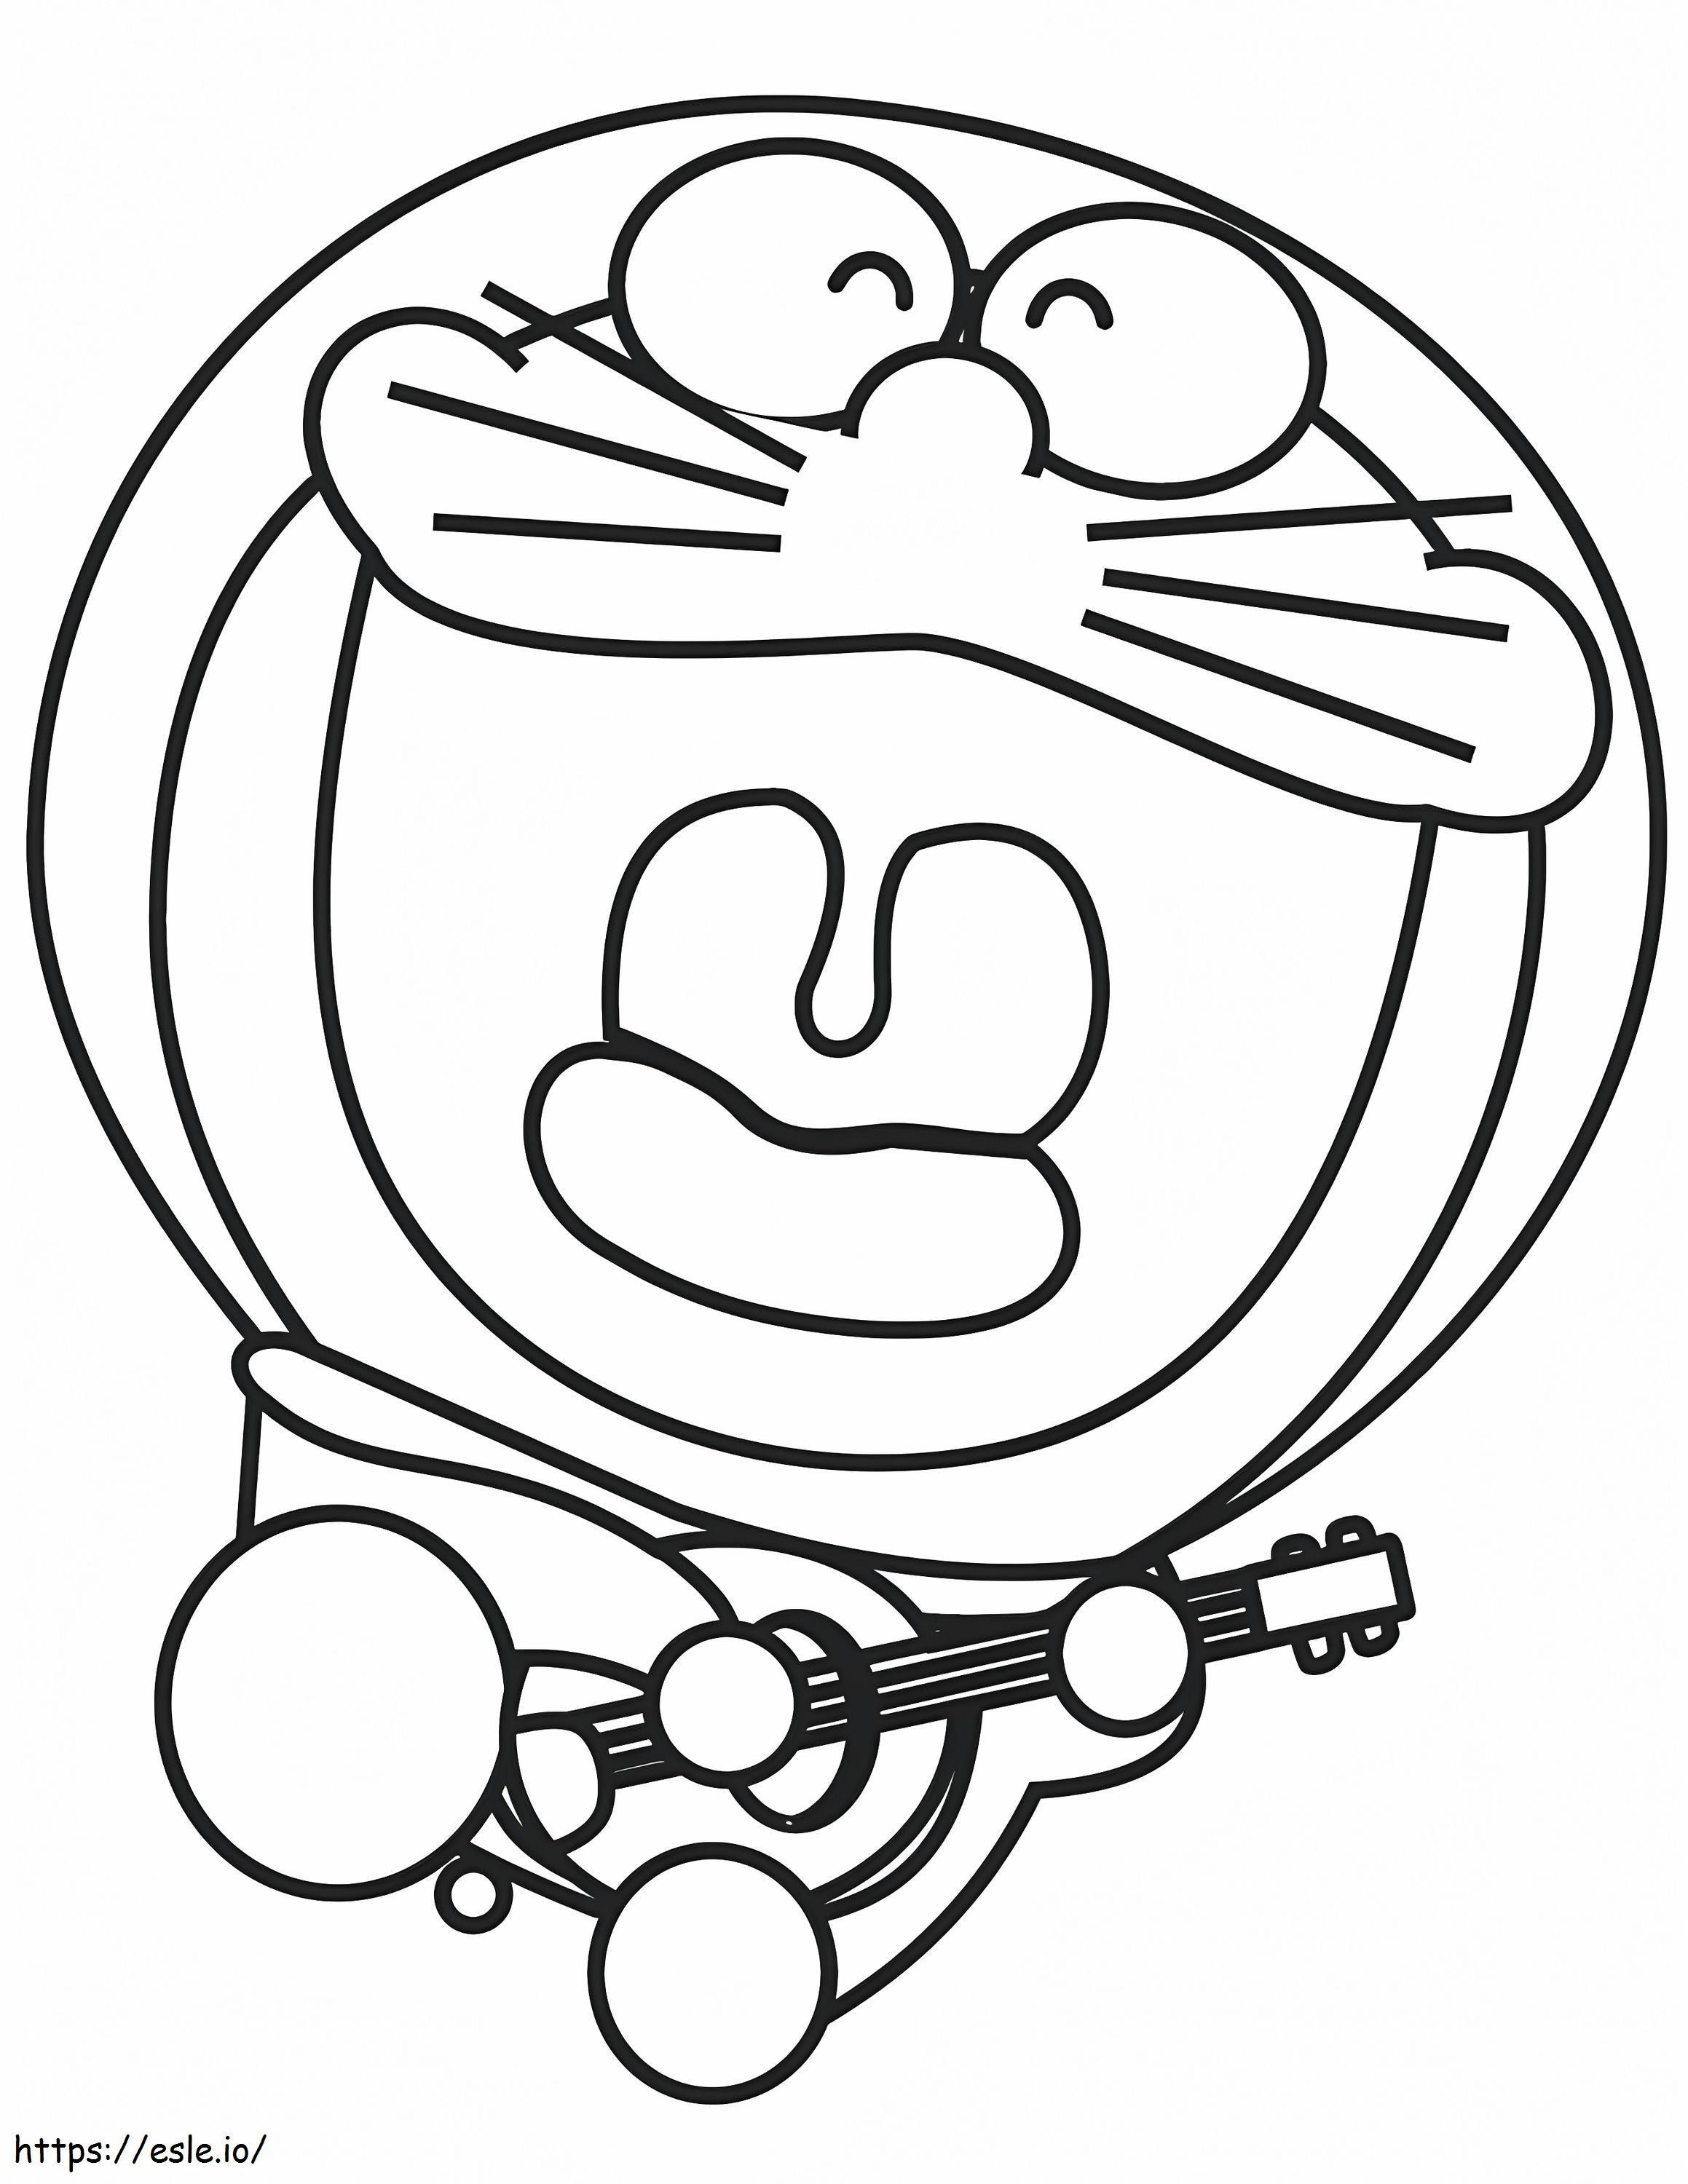 1531276686 Doraemon Playing Guitar A4 coloring page